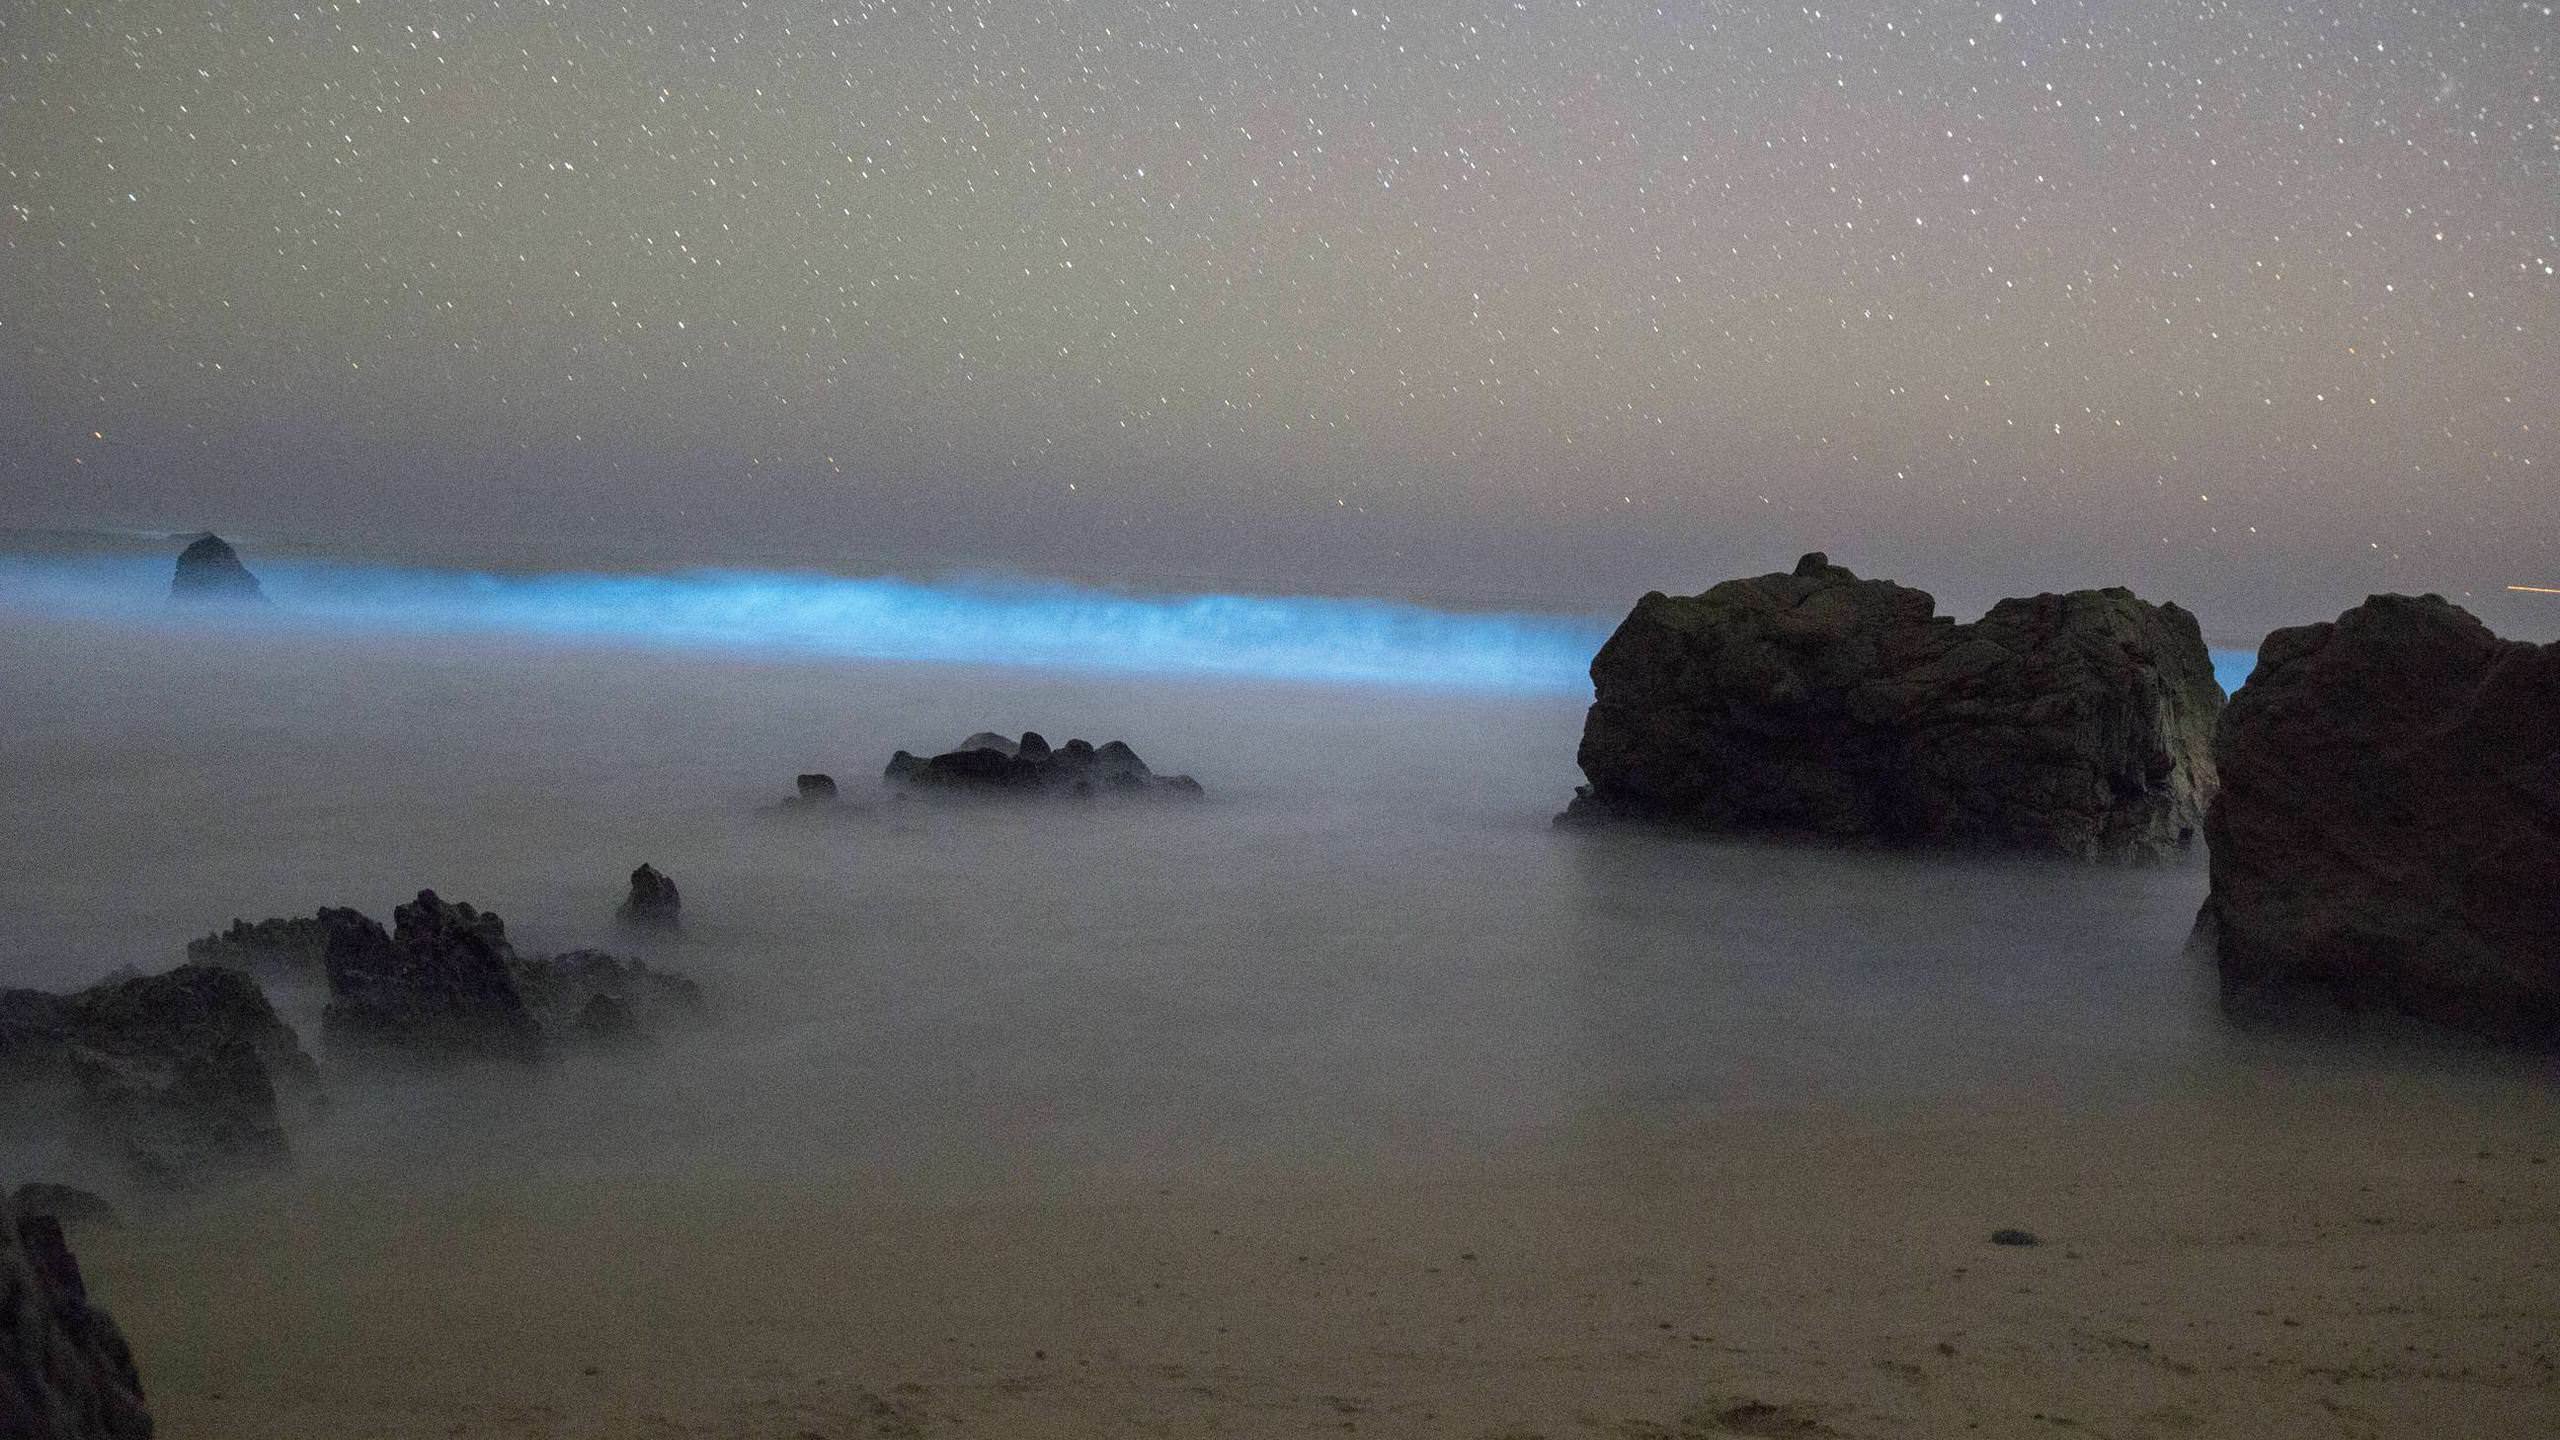 Bioluminescent k wallpapers for your desktop or mobile screen free and easy to download